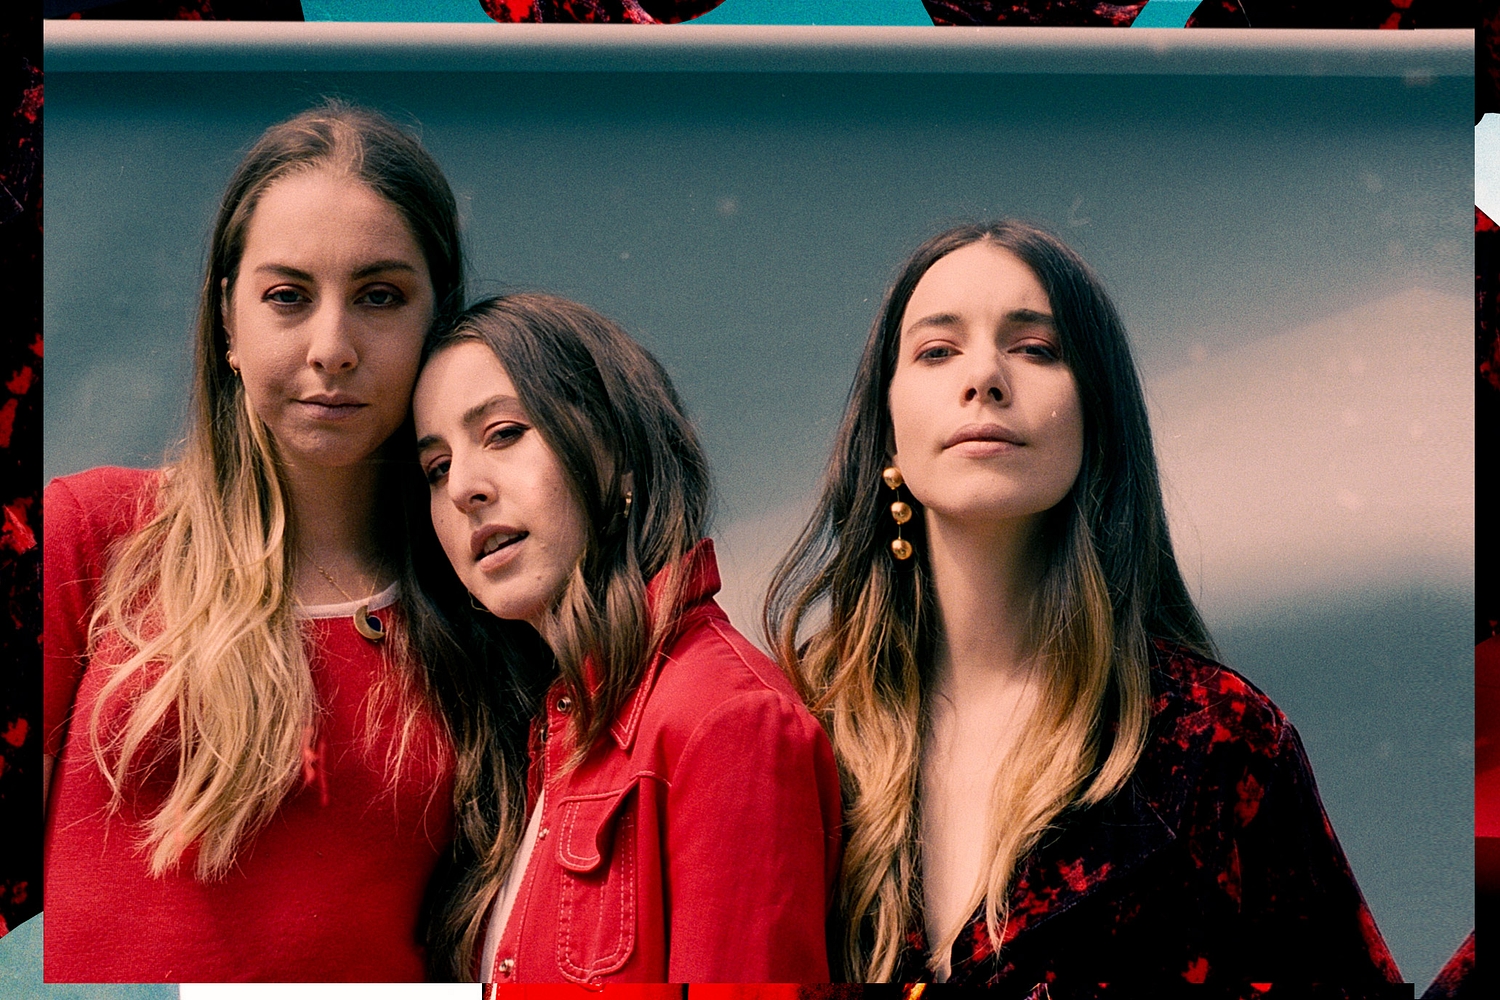 Watch Haim cover ‘That Don’t Impress Me Much’ by Shania Twain